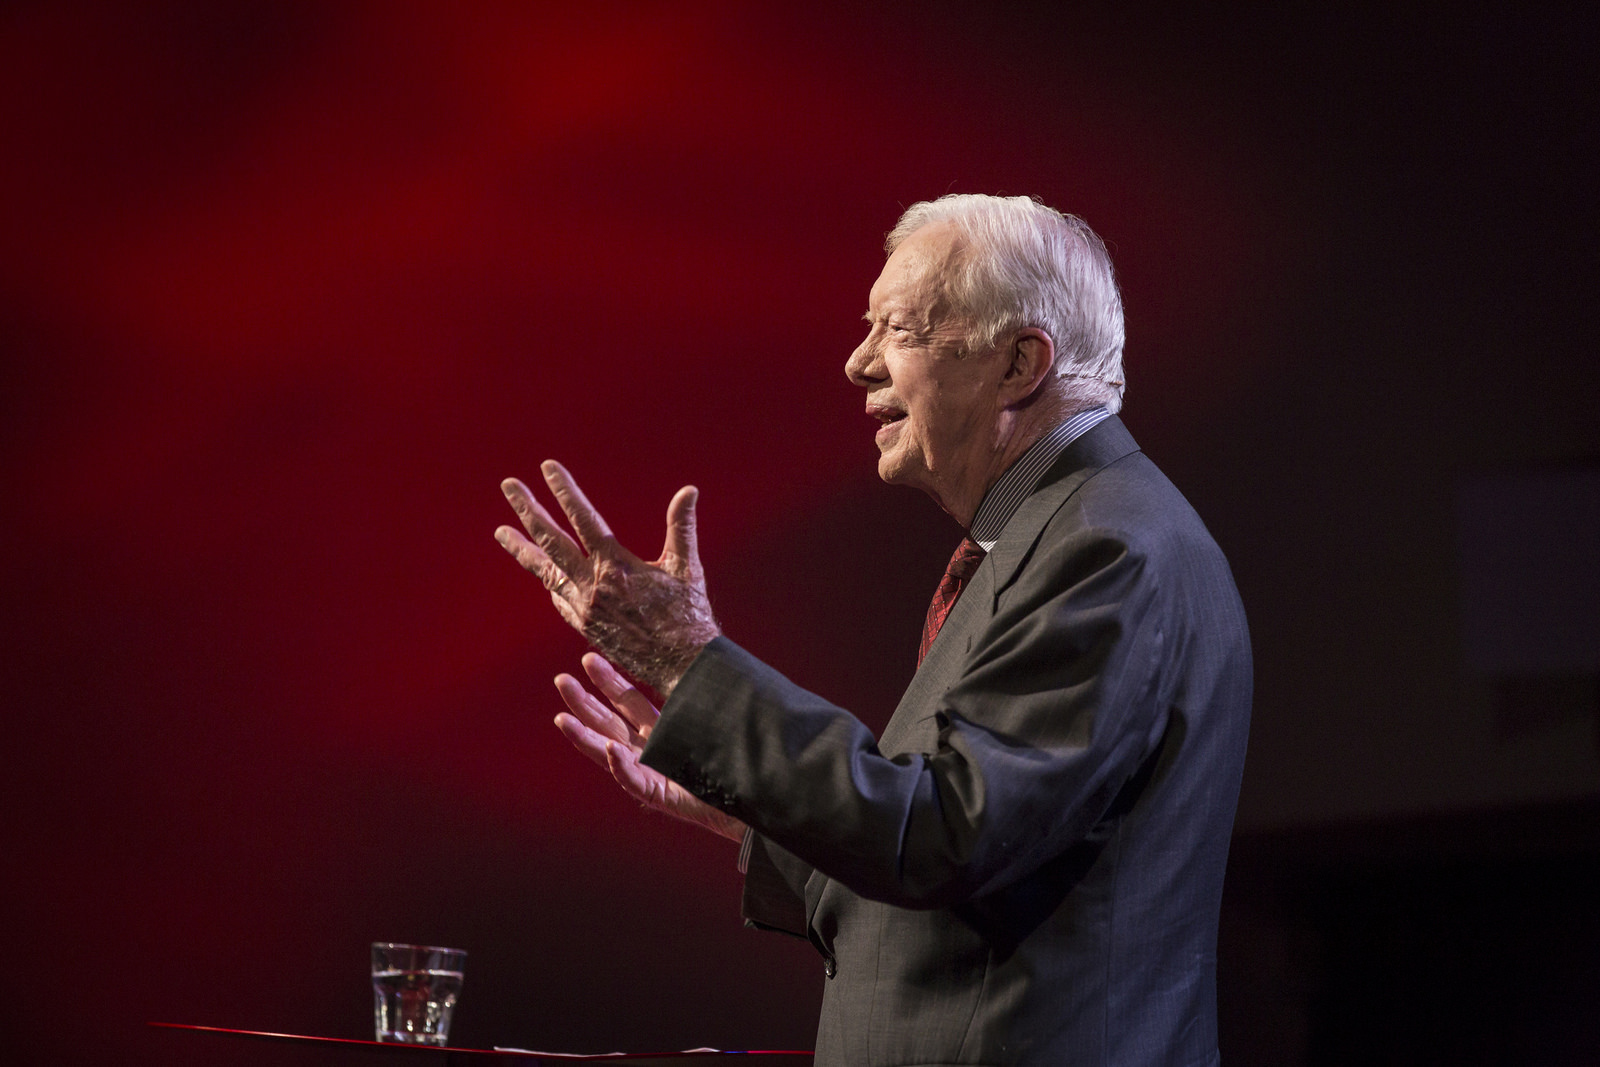 Jimmy Carter boldly said, “The number one abuse of human rights on Earth is the mistreatment of women and girls" during Session 4. Photo: Marla Aufmuth/TED